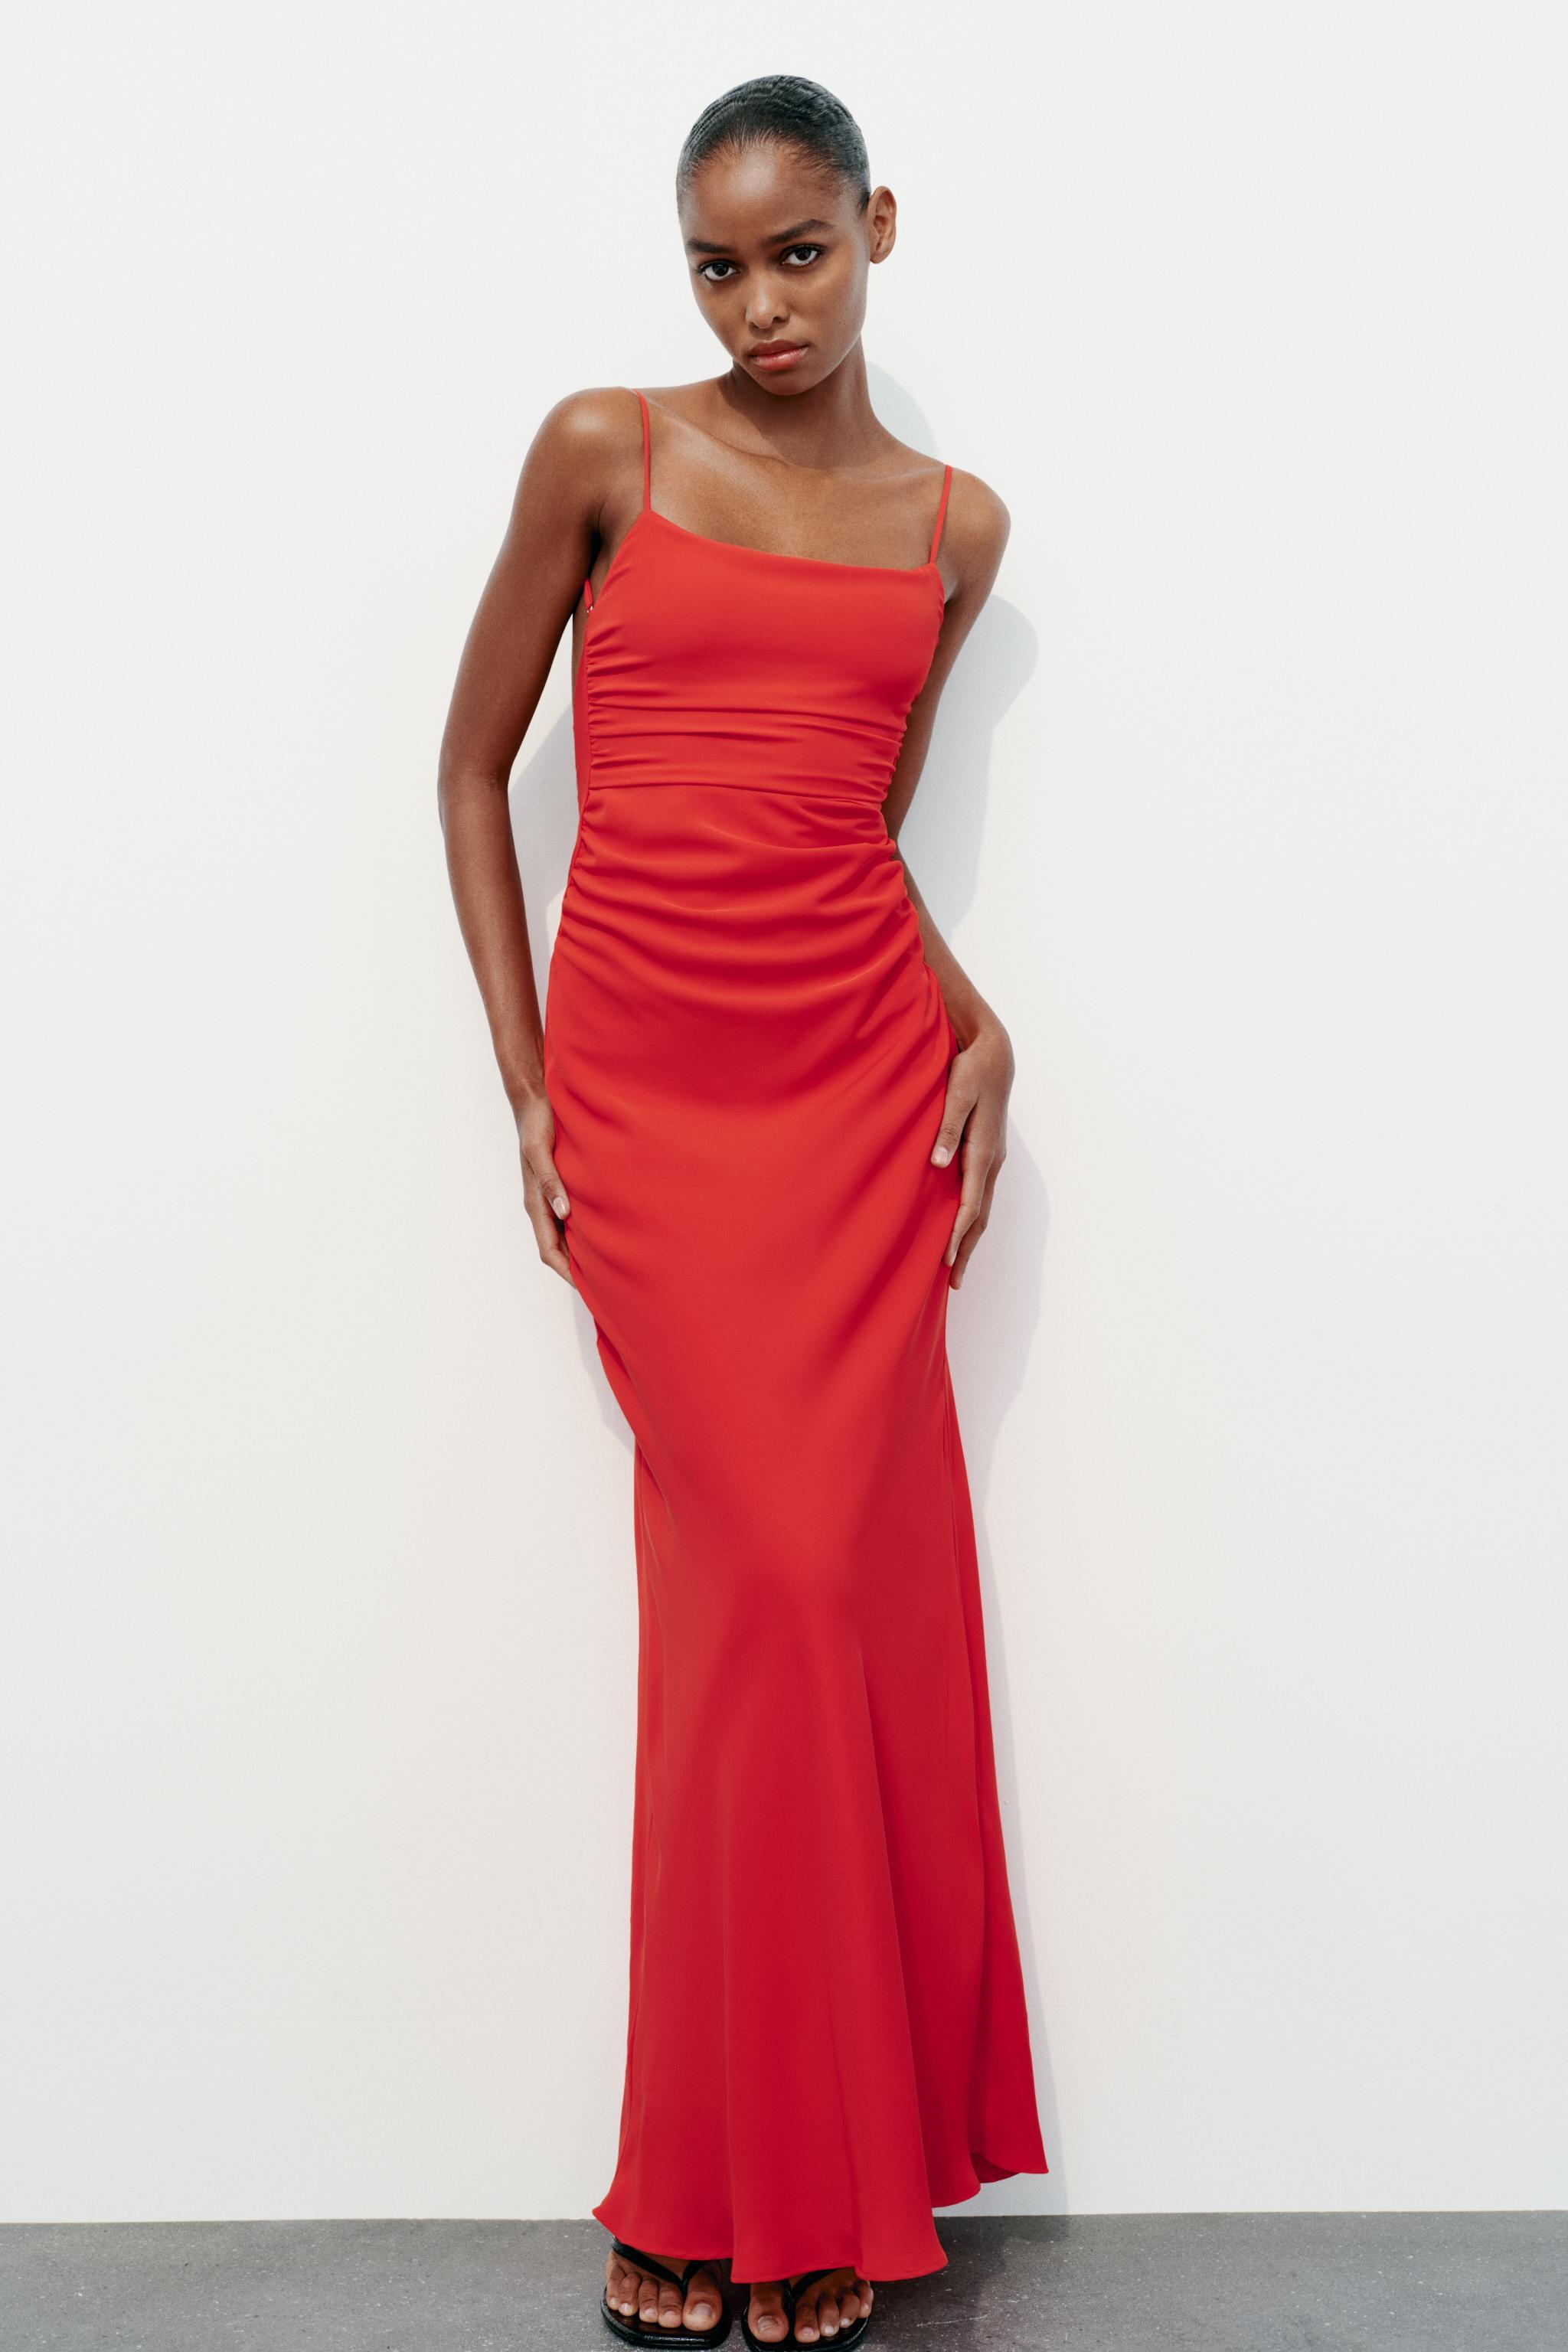 Women's Red Dresses, Explore our New Arrivals